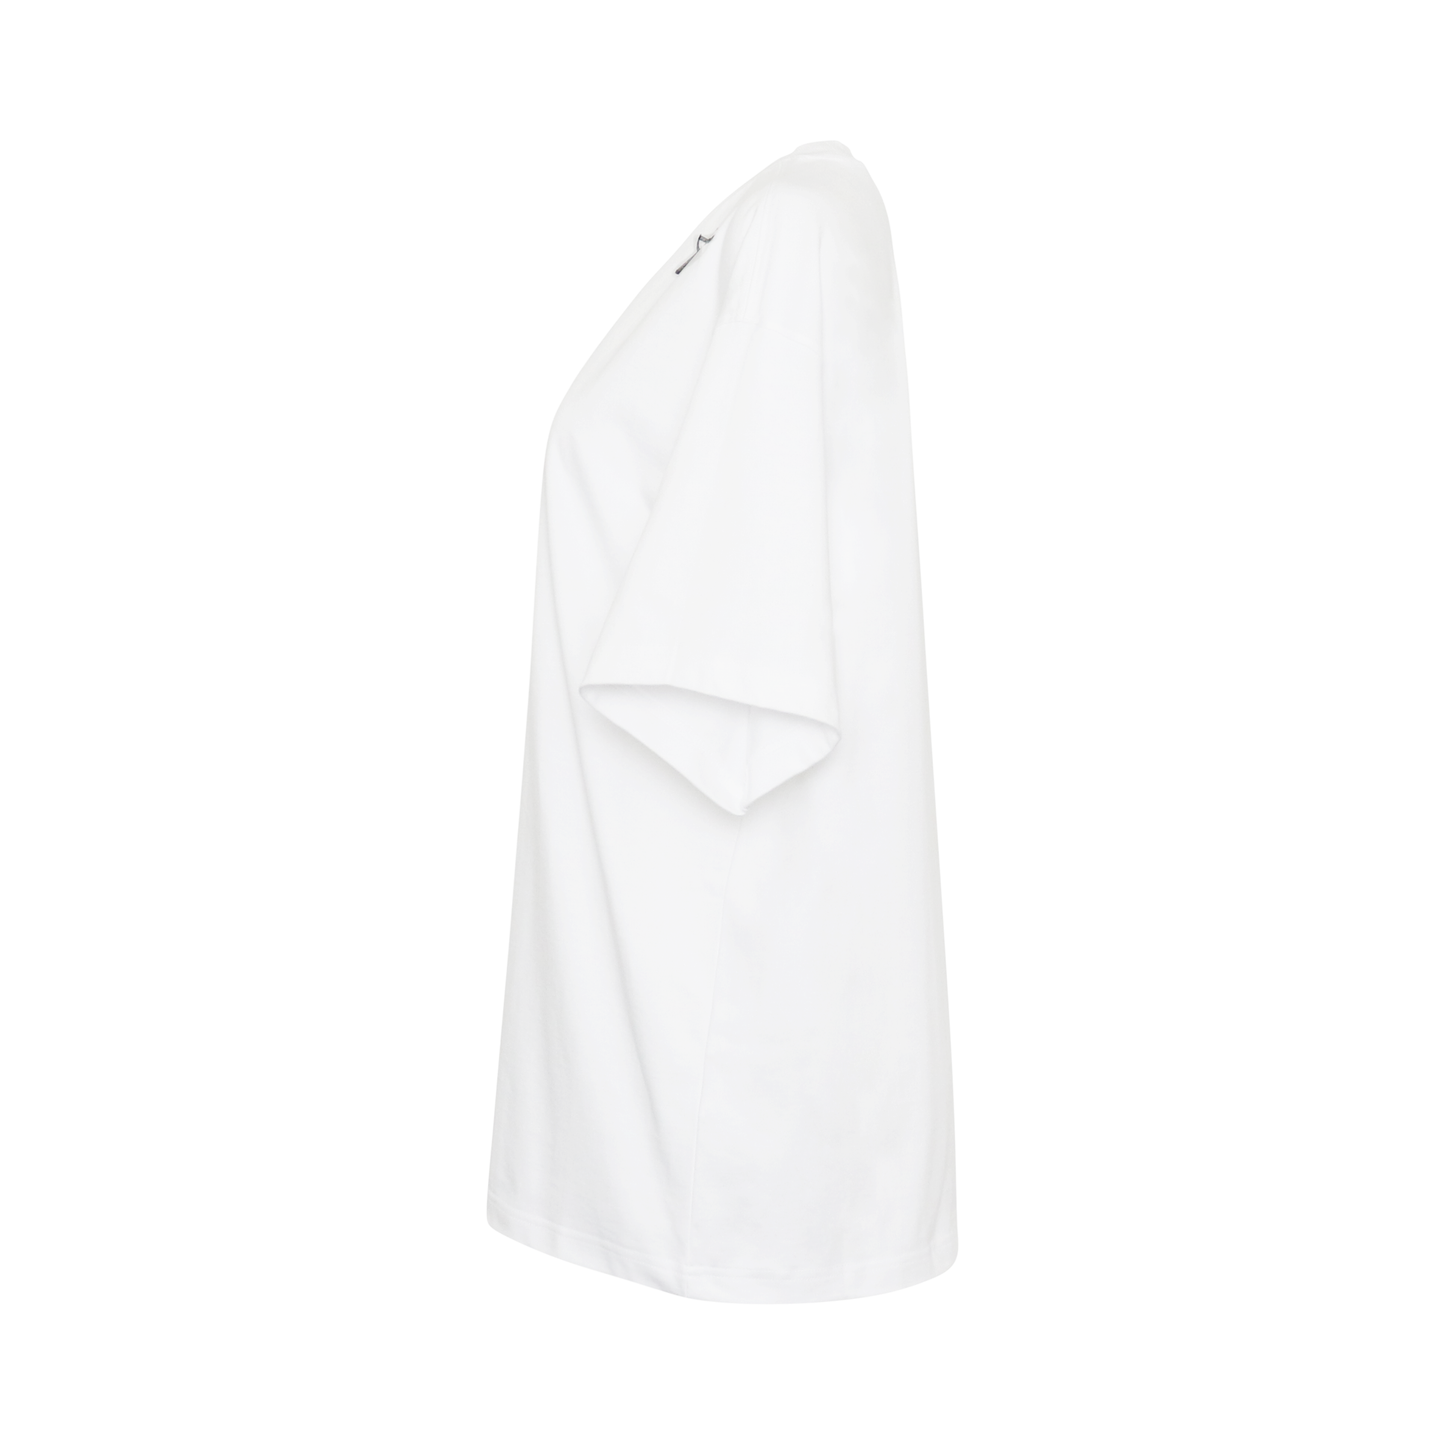 Classic WD Logo T-Shirt in White